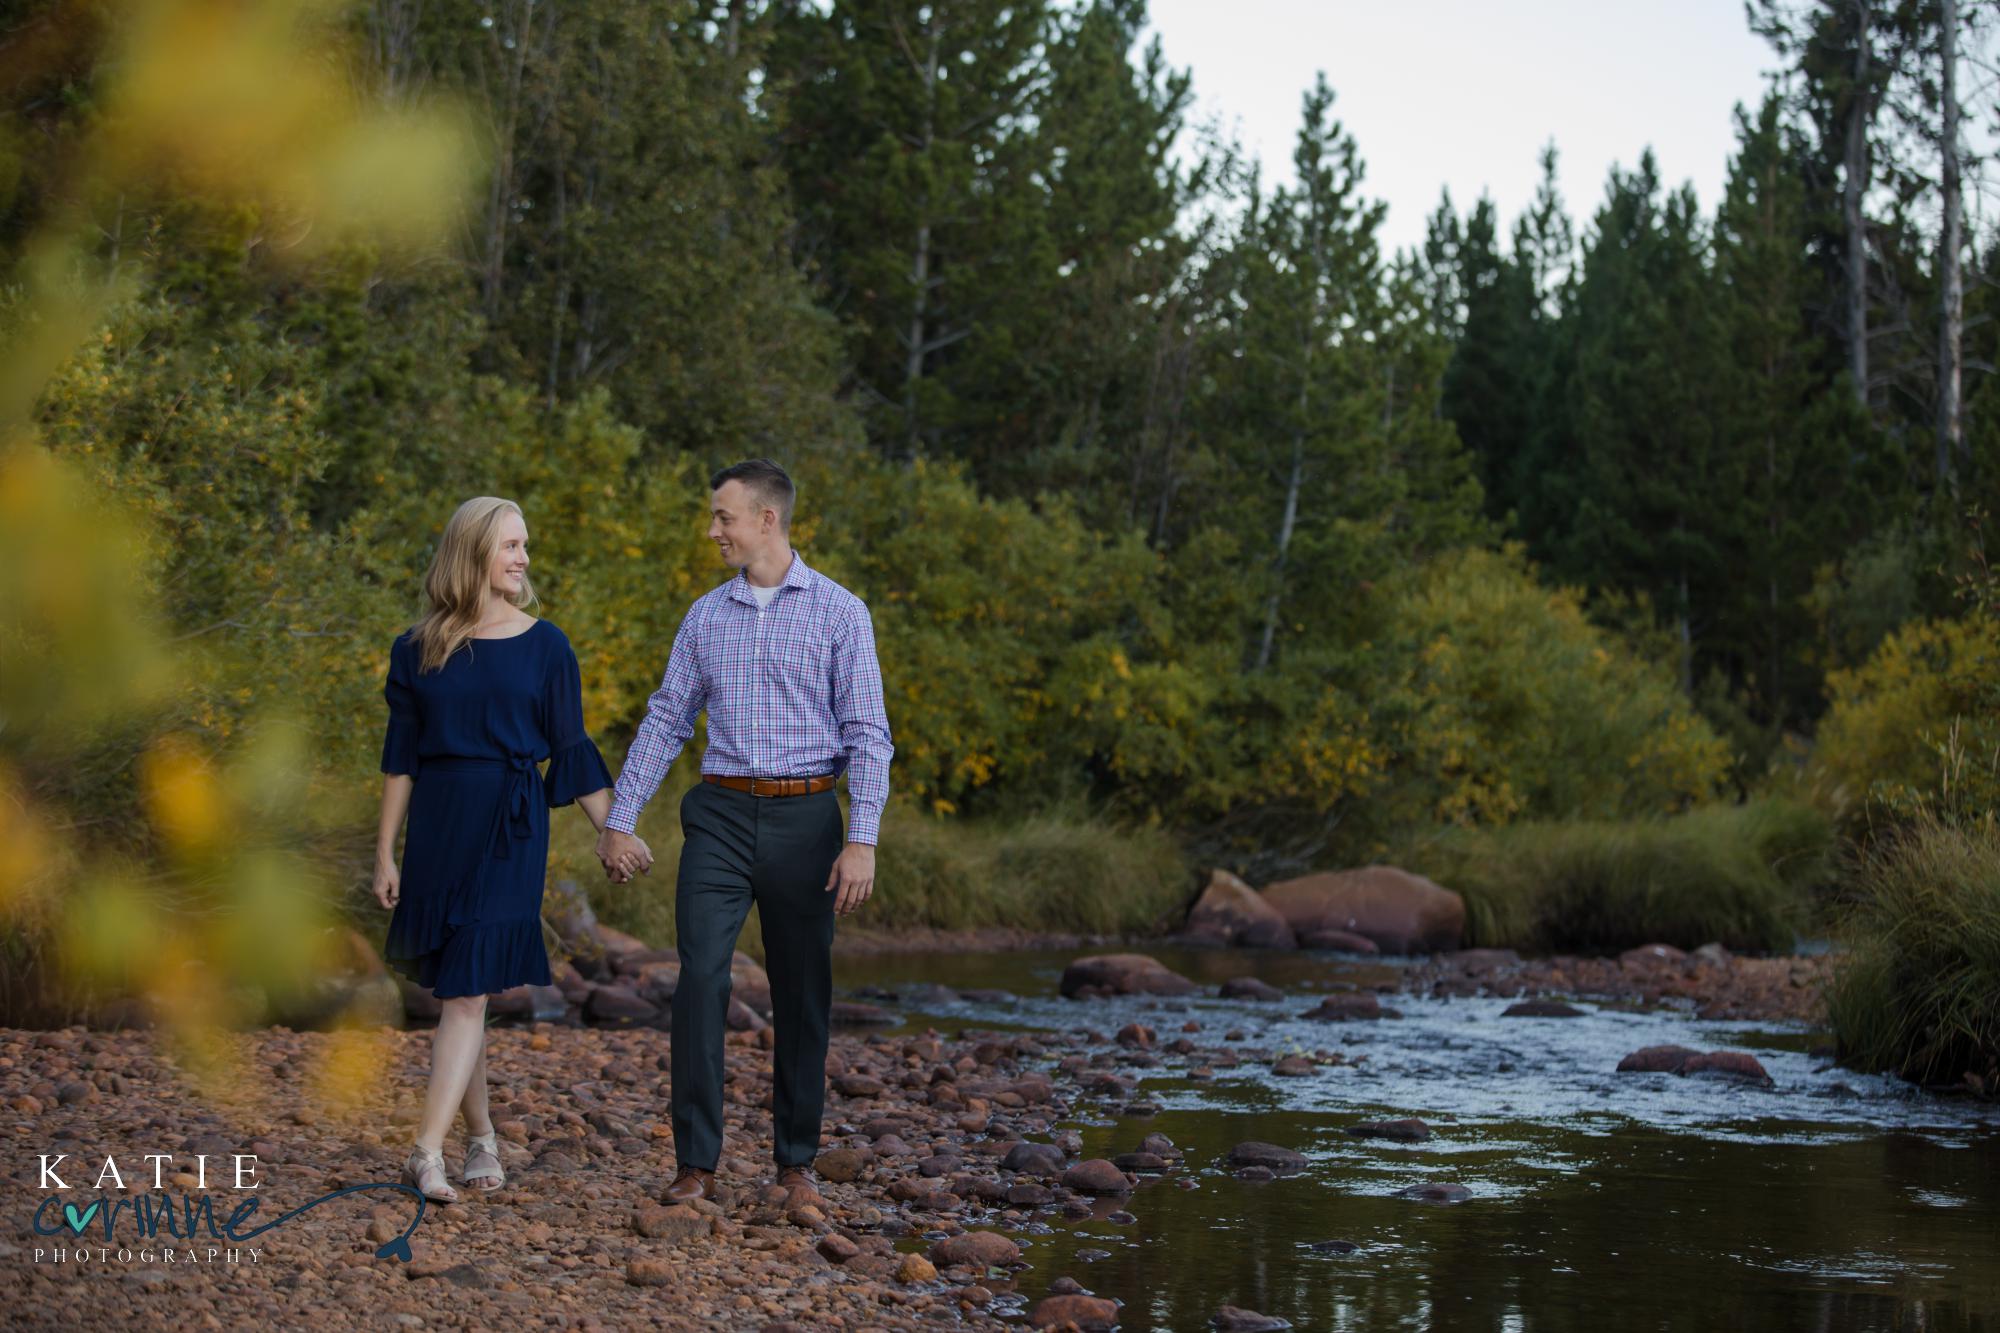 Colorado couple poses for engagement photographer